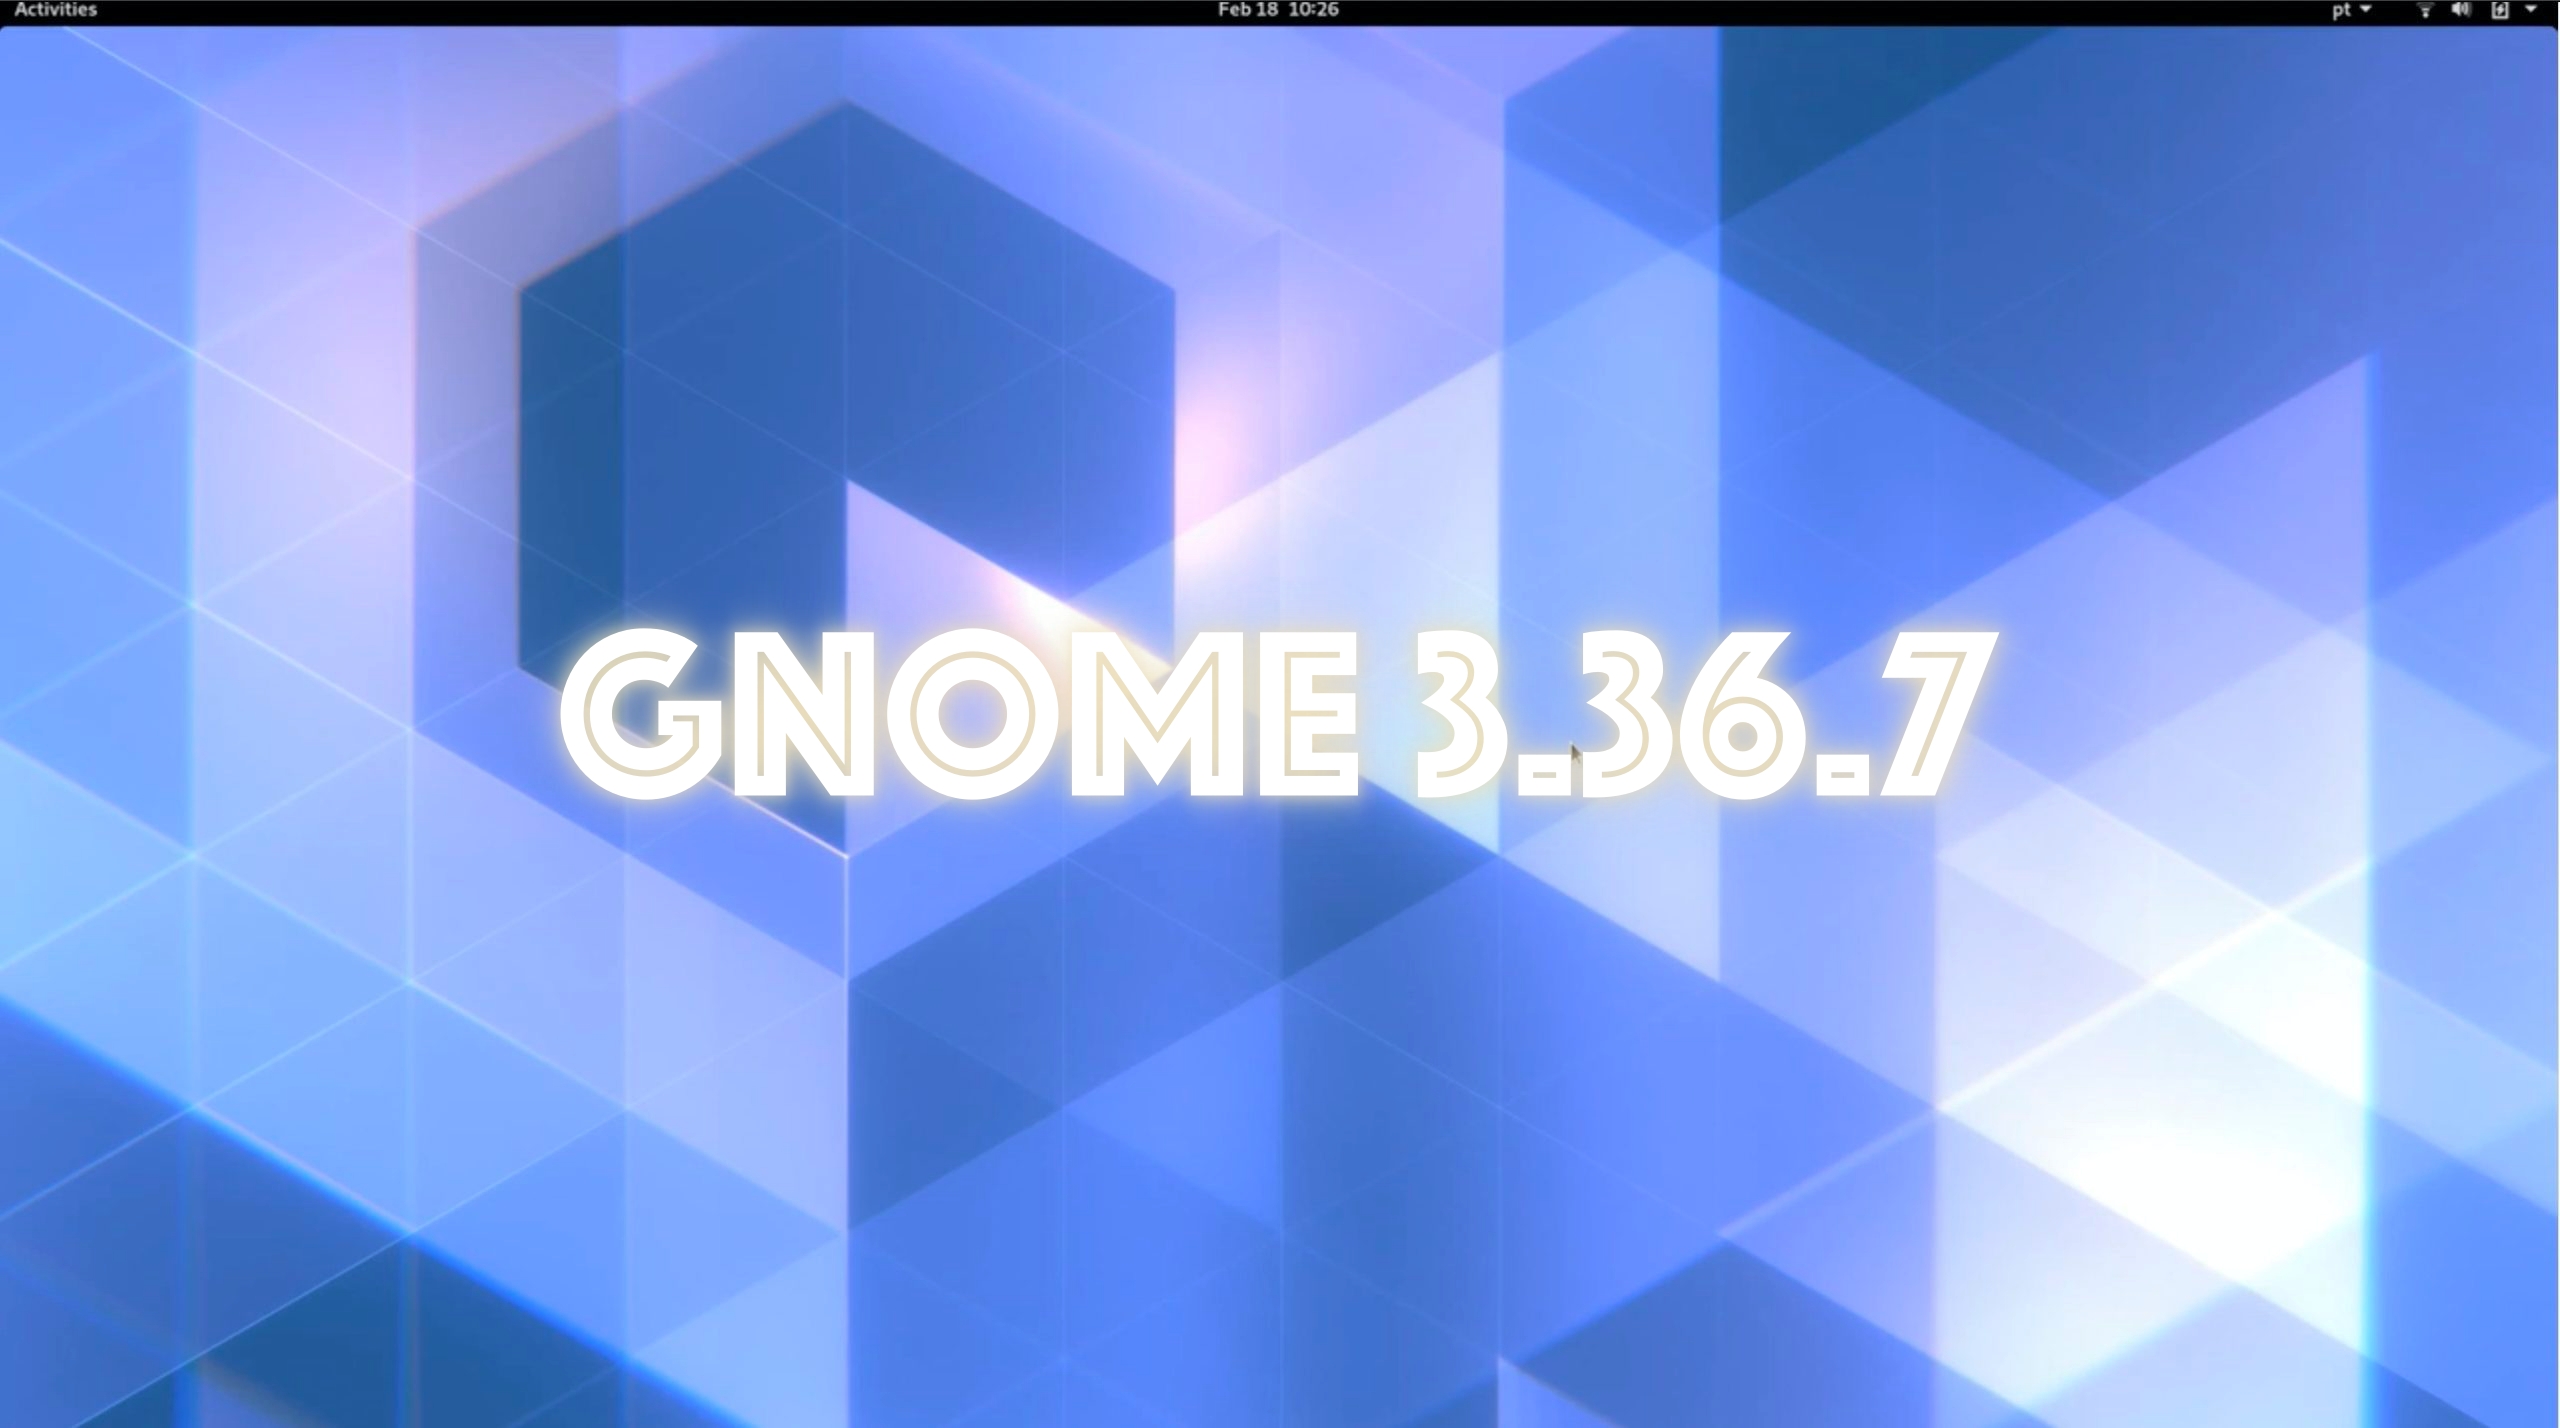 GNOME 3.36.7 Desktop Update Released with Various Bug Fixes